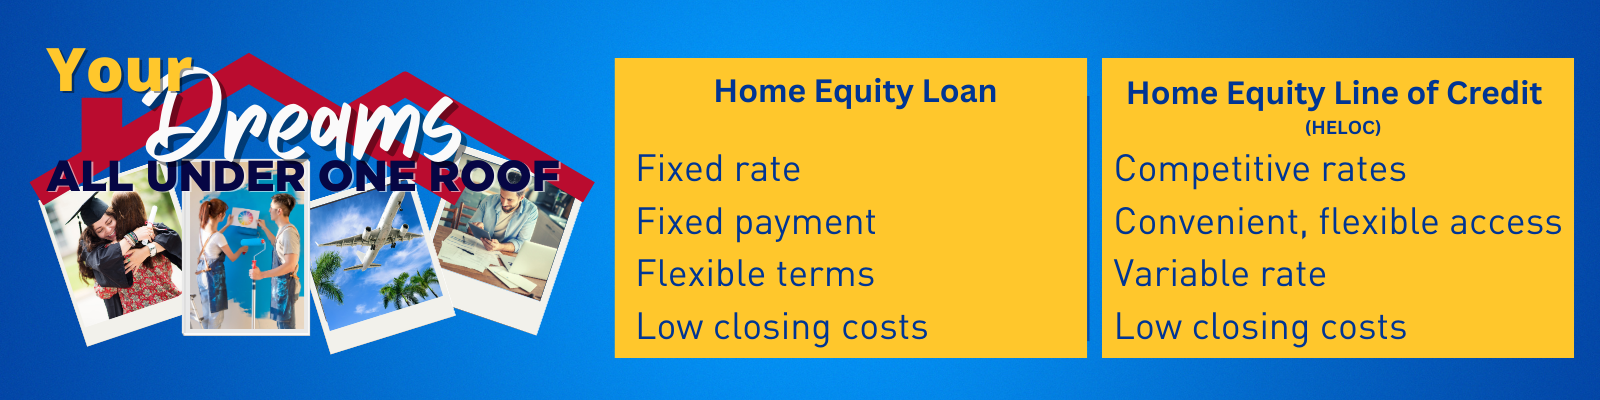 All your dreams under one with with a home equity loan.